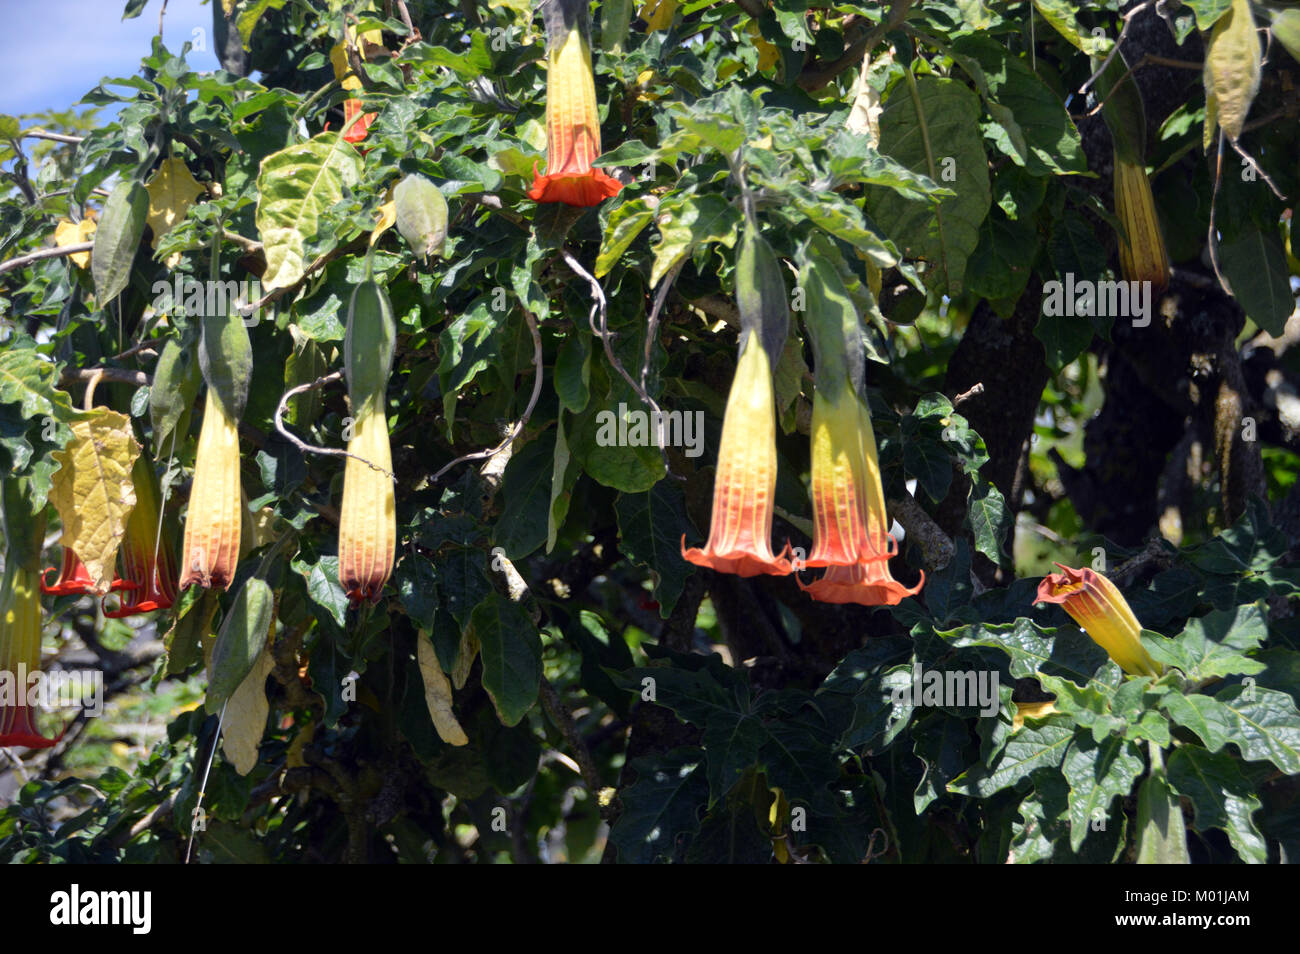 Brugmansia sanguinea Flowers (red angel's trumpet) grown in a Garden on St Agnes Island, Isles of Scilly, England, Cornwall, United Kingdom. Stock Photo